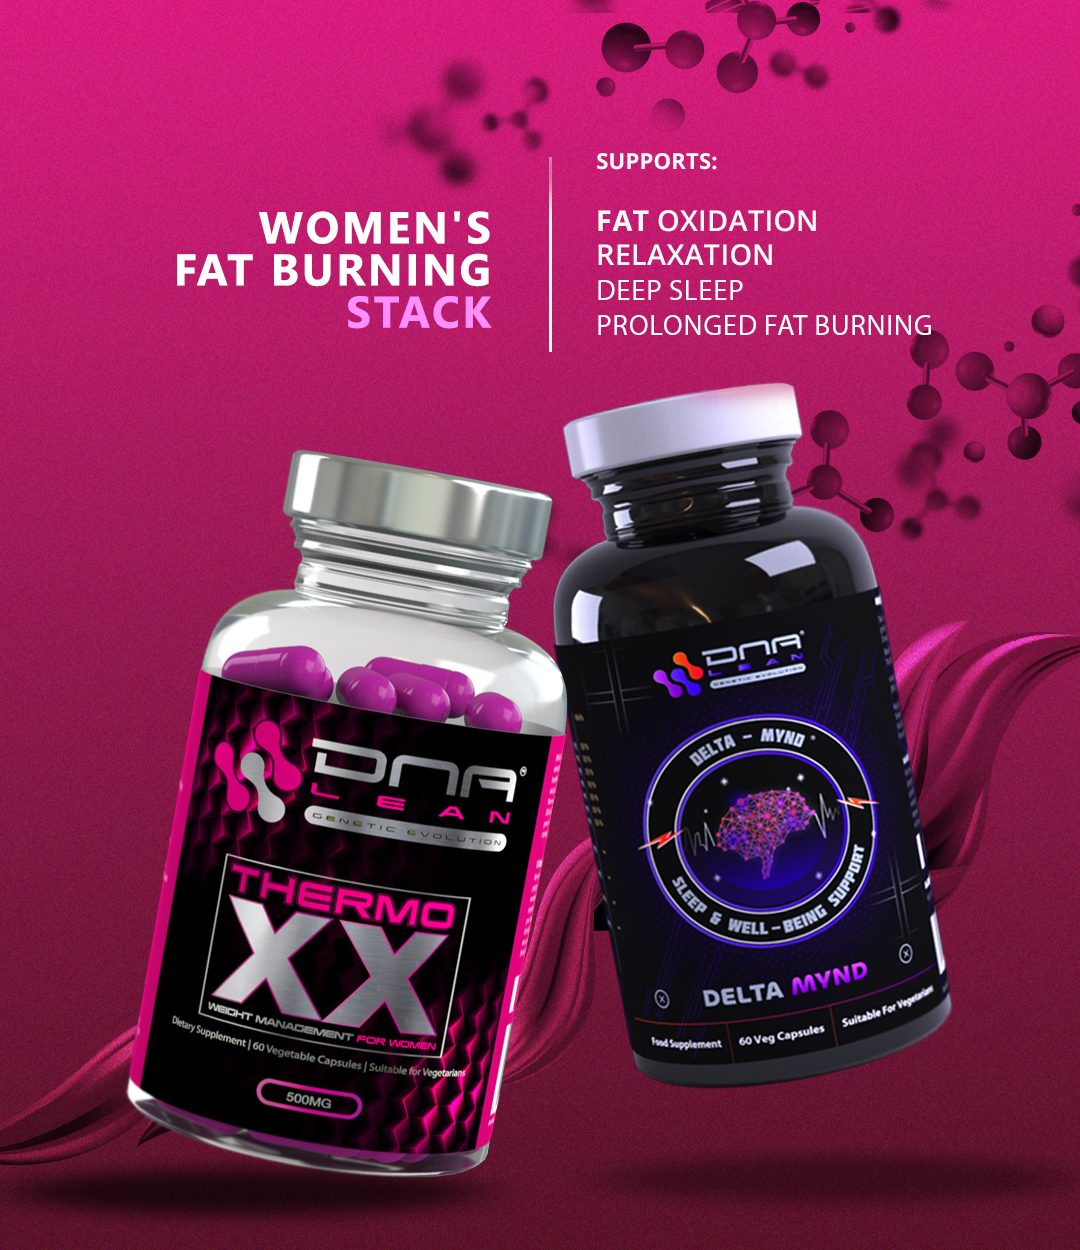 Women's fat burning stack summary points